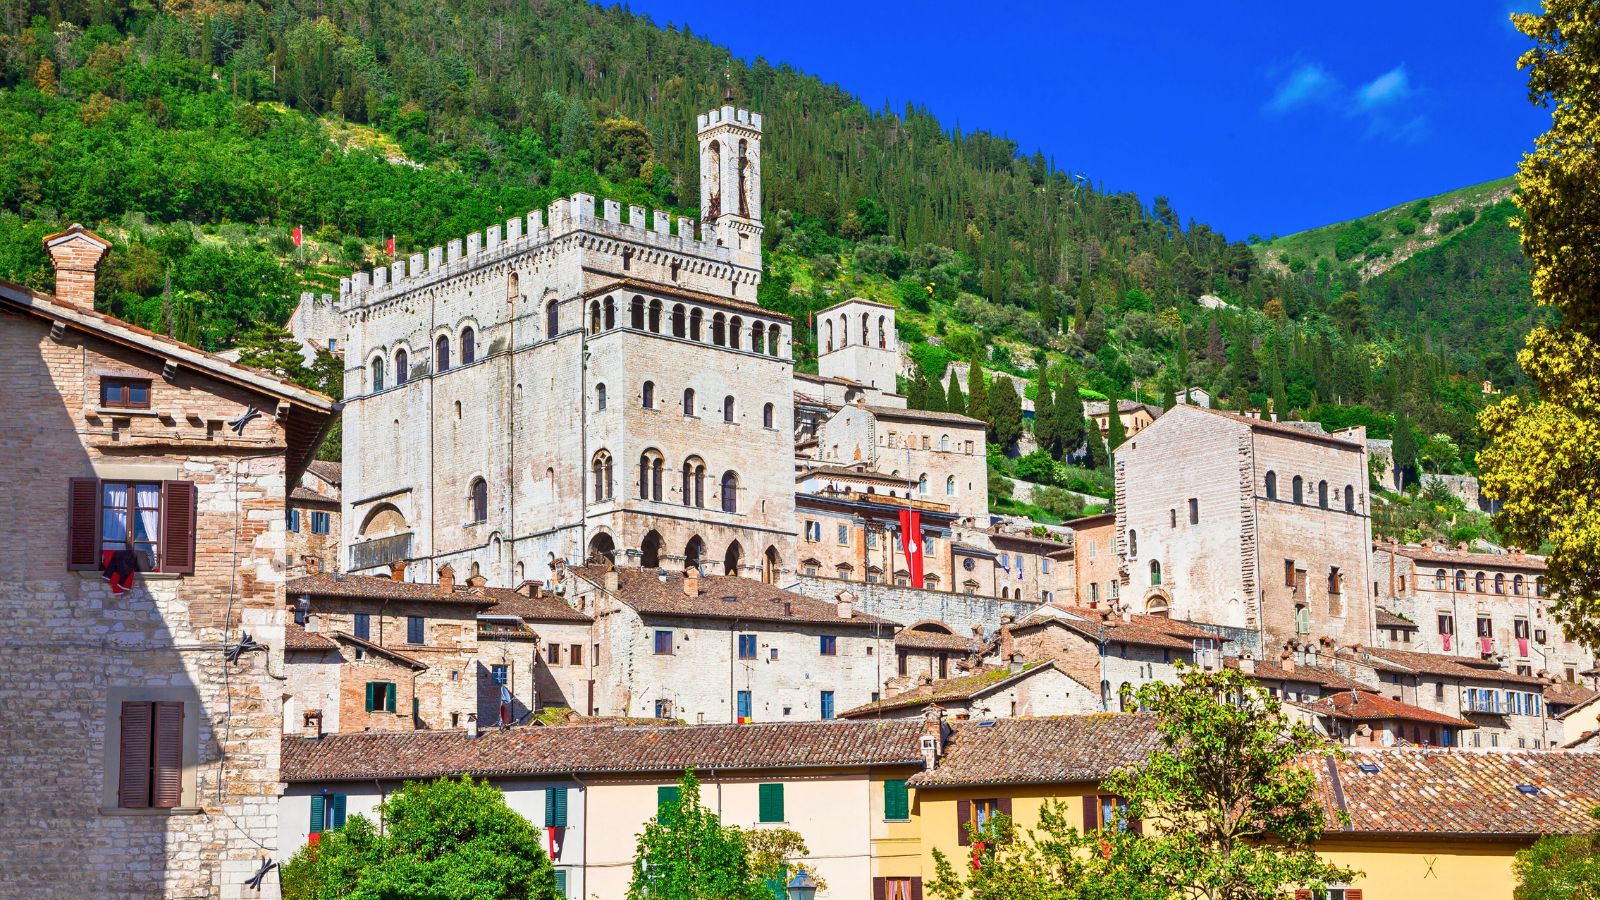 <p><span>Most people looking for a taste of medieval Italy head straight to Florence. However, if you want a similar level of beauty, history, and intrigue with fewer crowds, go to </span><i><span>Gubbio</span></i><span>.</span></p><p><span>The small hilltop destination in Umbria is one of the best-preserved medieval towns in the country. There are cobblestone streets, Gothic palaces, 13</span><span>th</span><span>-century cathedrals, and even a Roman amphitheater. Monte Ingino towers above the town, too, offering terrific opportunities for outdoor enthusiasts.</span></p>